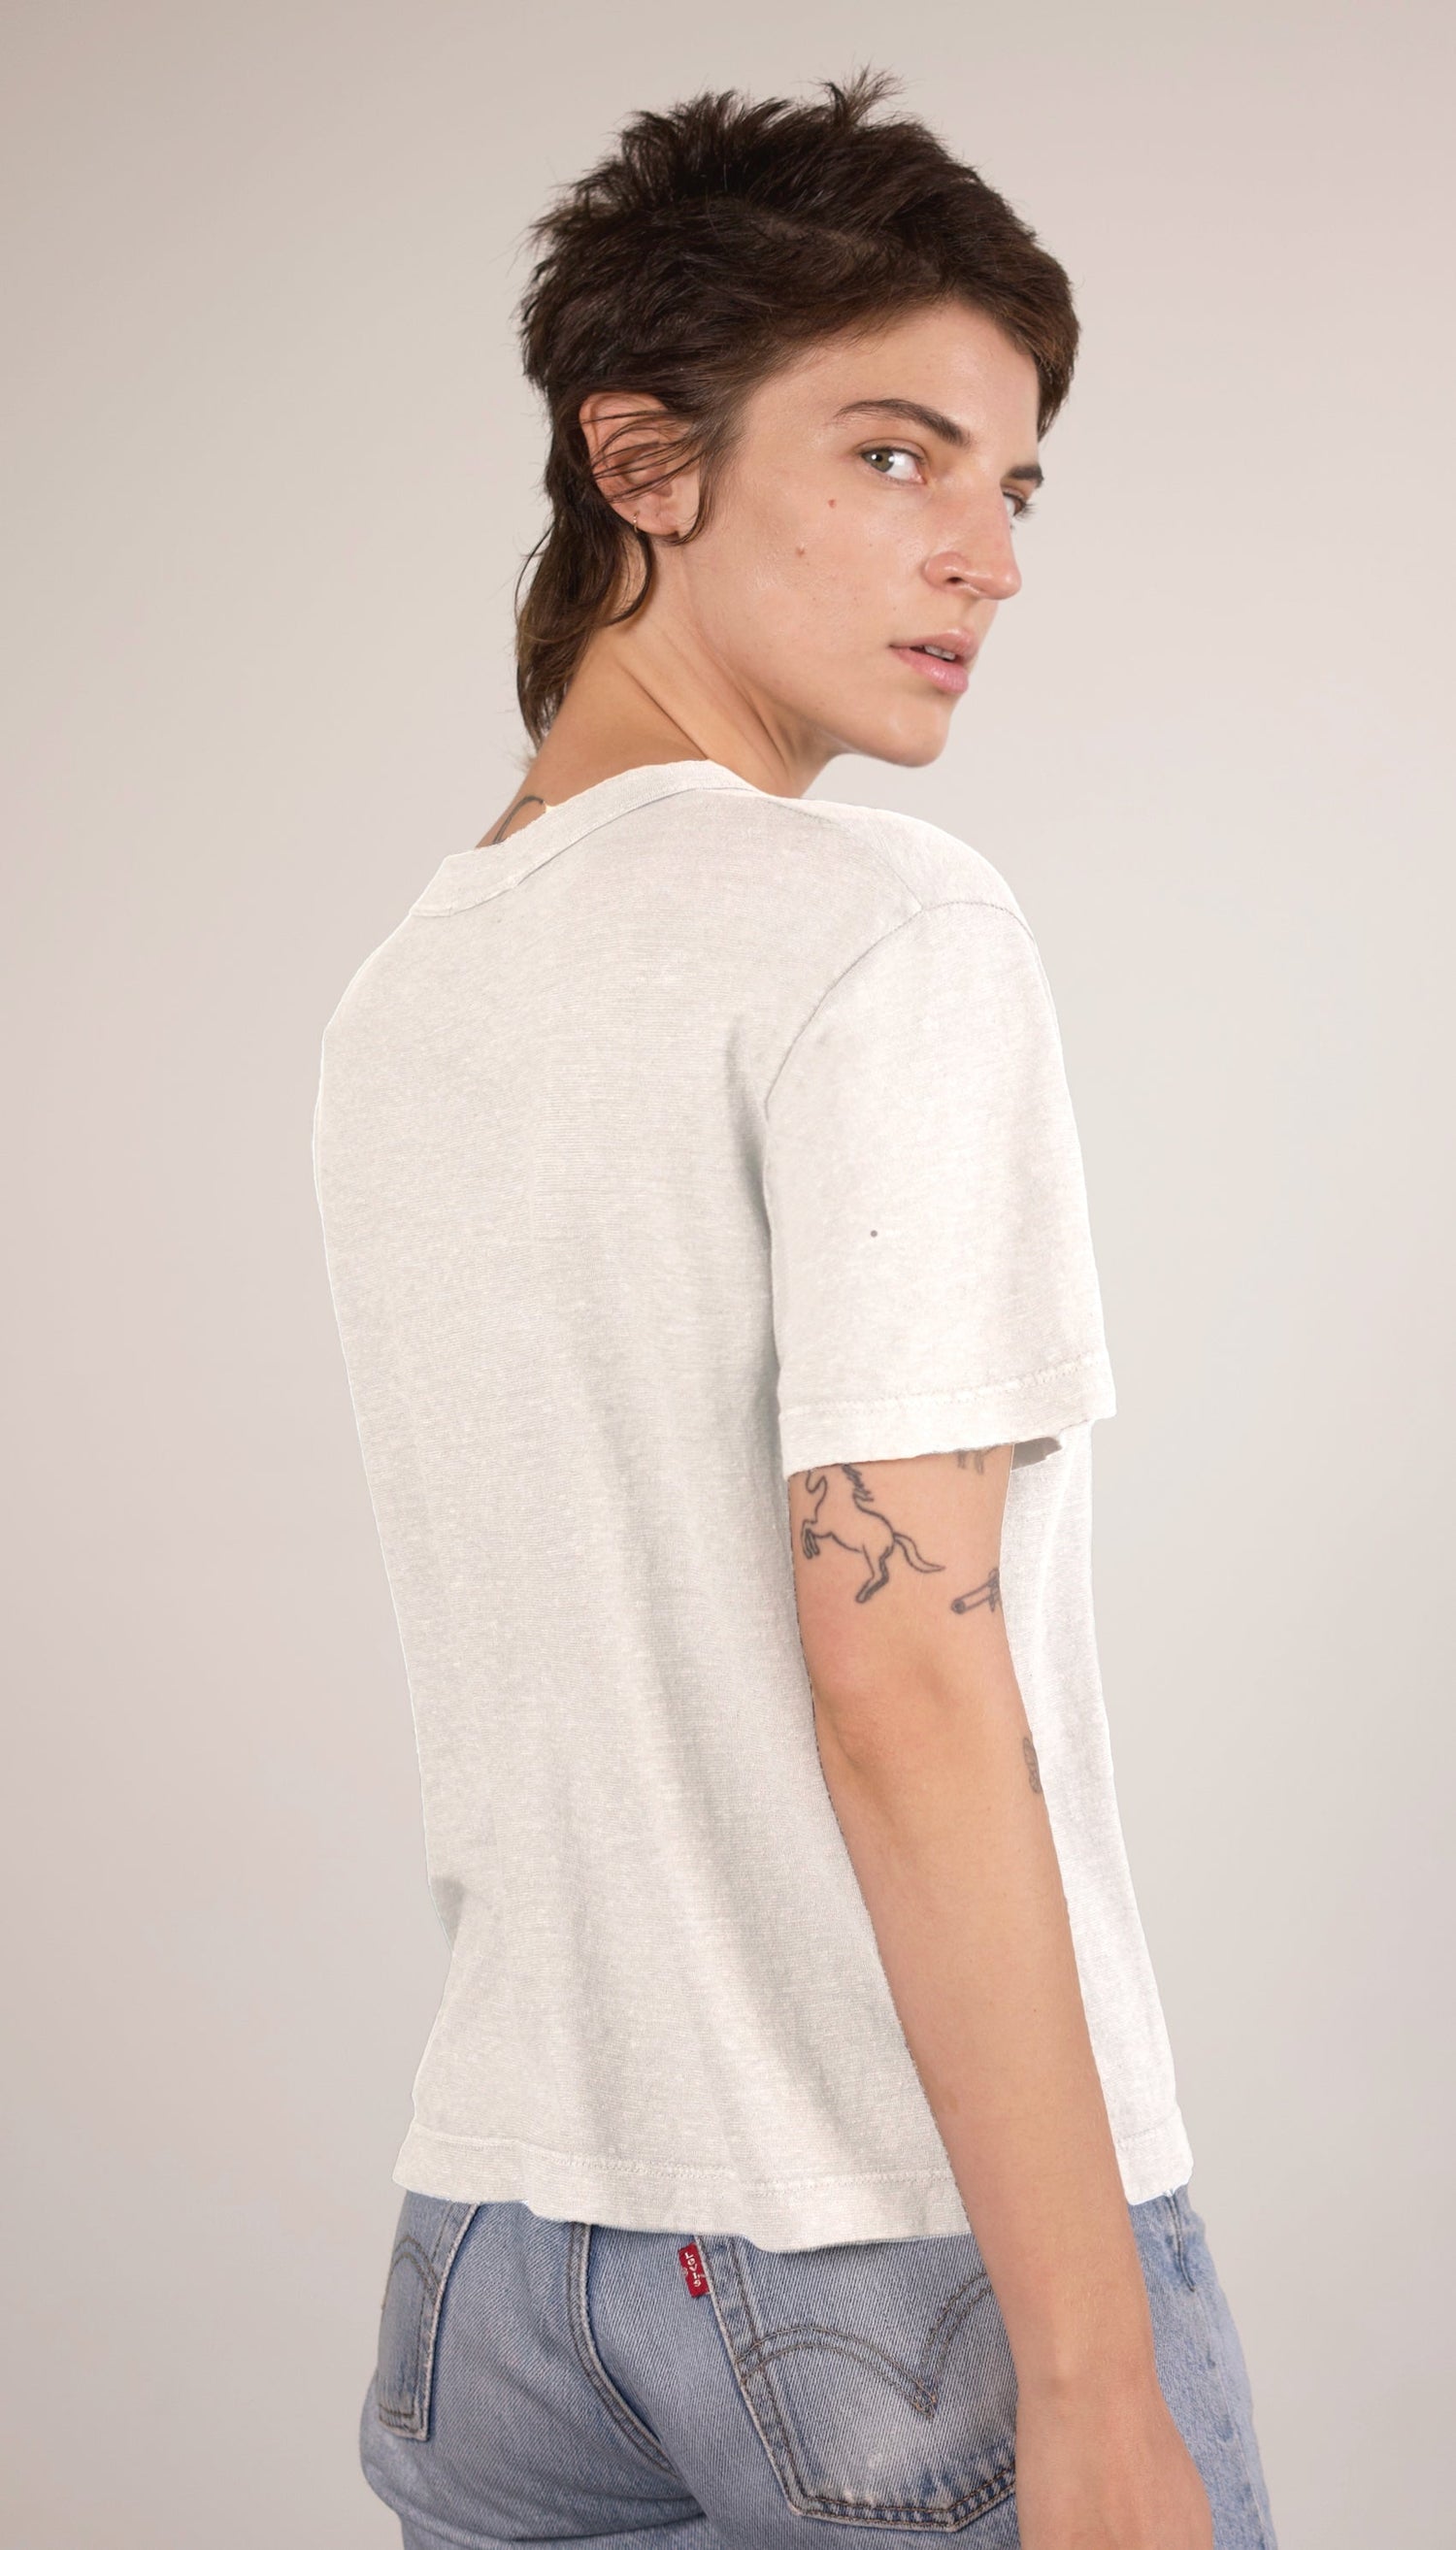 "The Mod Tee" - the perfect staple tee with a luxurious drape. Its loose, boxy fit and vintage bound neck add a cool factor. Striking the perfect balance between a relaxed, boxy silhouette and a flattering length complements any body shape.Made with 55% Hemp/ 45% Organic Cotton Jersey.